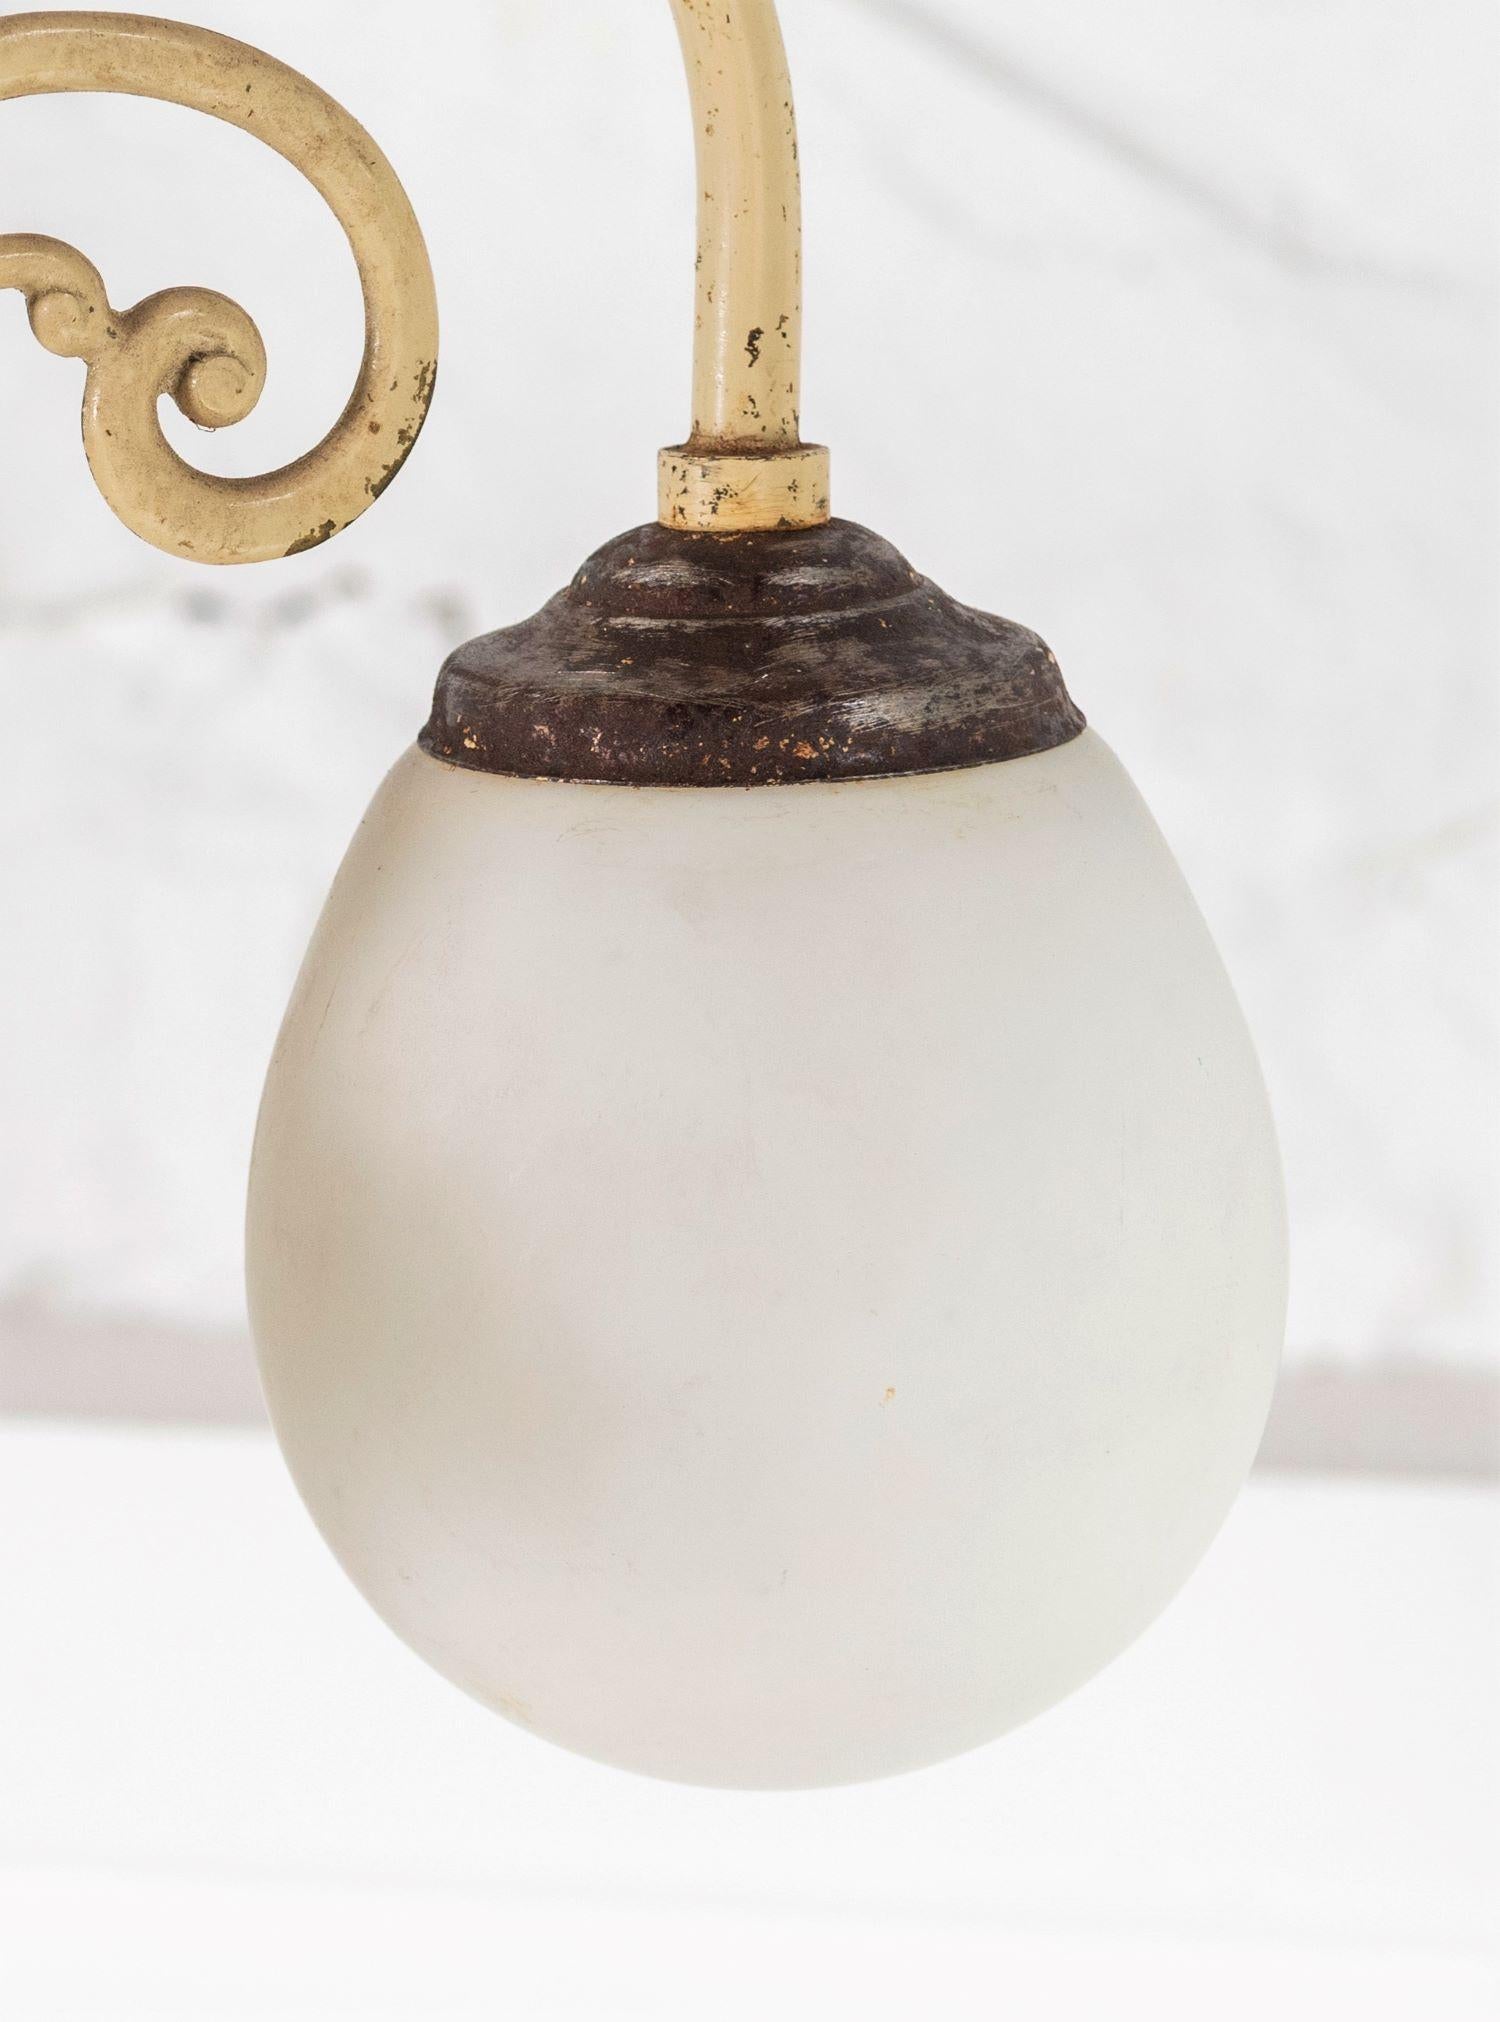 A stylish 1920s three arm chandelier with small opaline lamp shades. Three scroll arms made from solid brass on a central steel column, steel galleries with opaline droplet lamp shades.
Finished in its original enamel type cream paint which gives